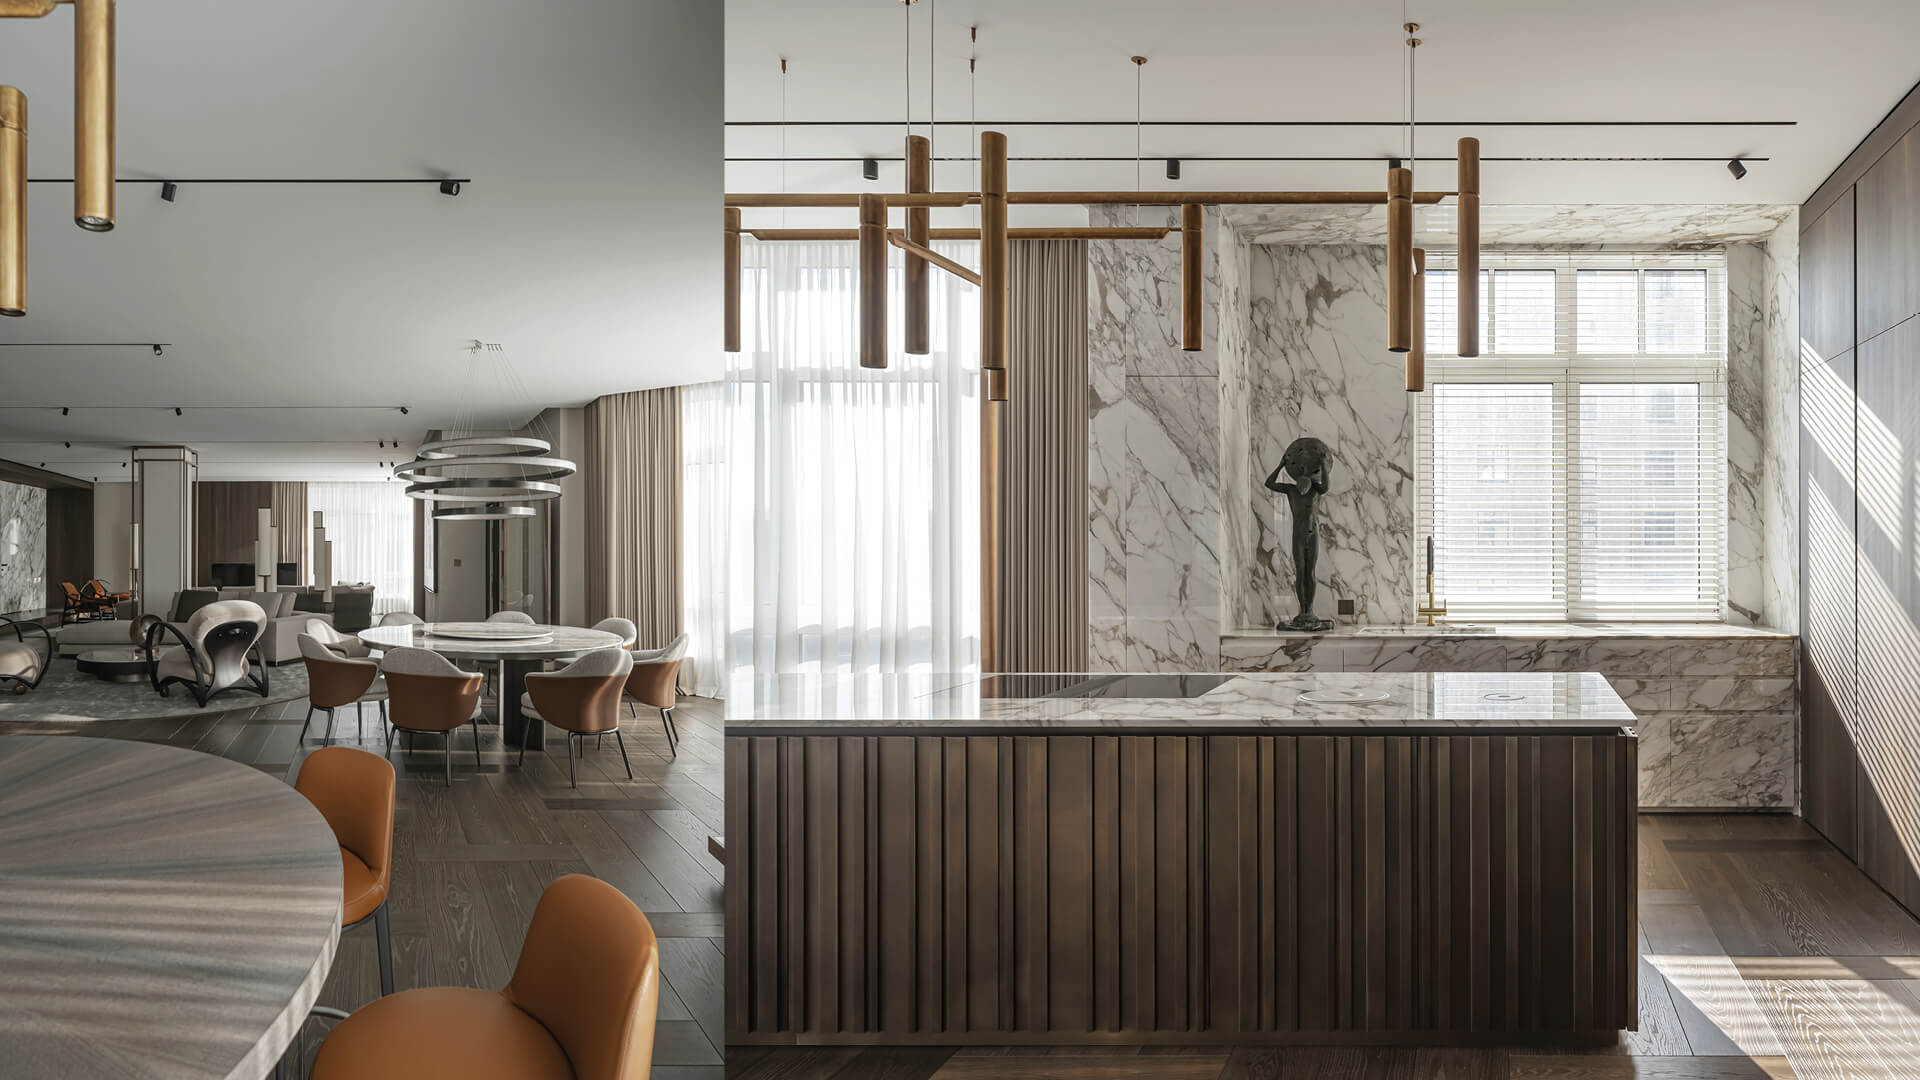 YODEZEEN infuses an air of contemporary luxury into the ‘Grand Apartment’ in Kyiv